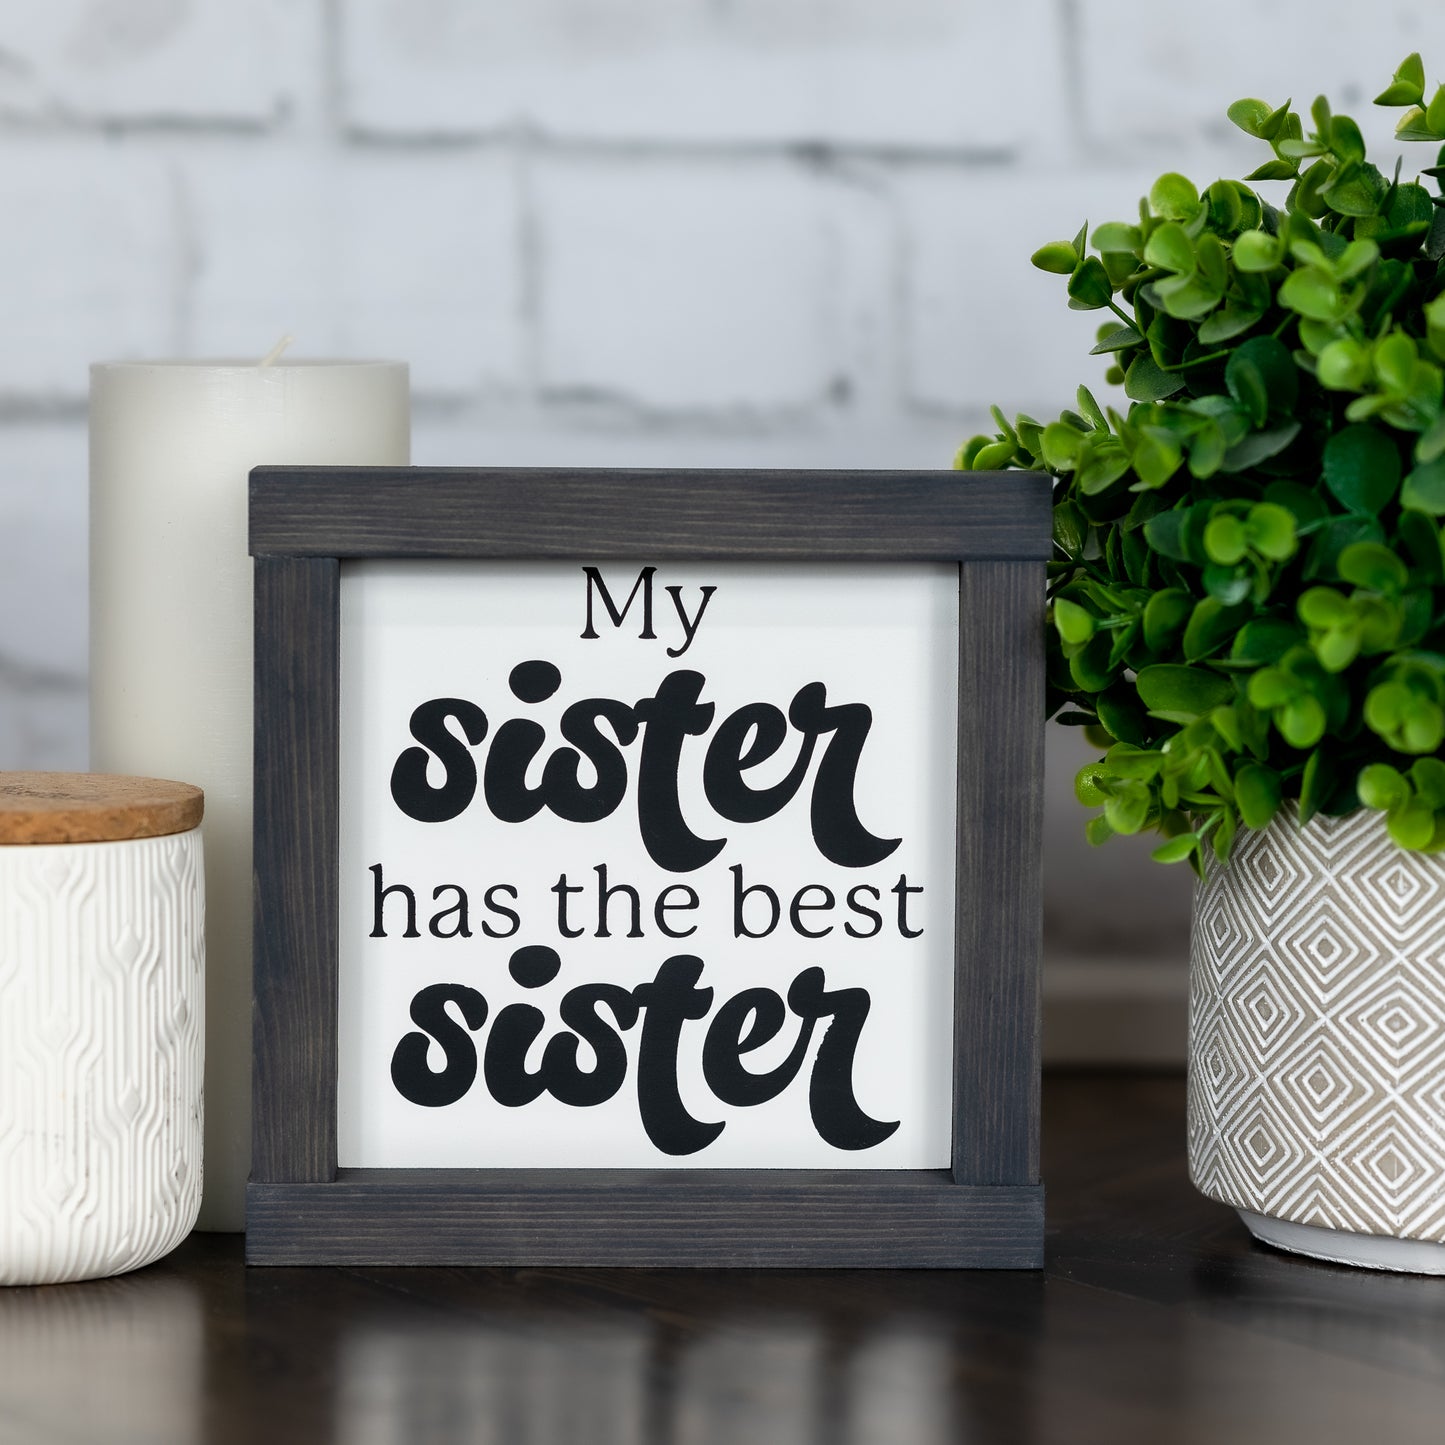 my sister has the best sister ~ wood sign